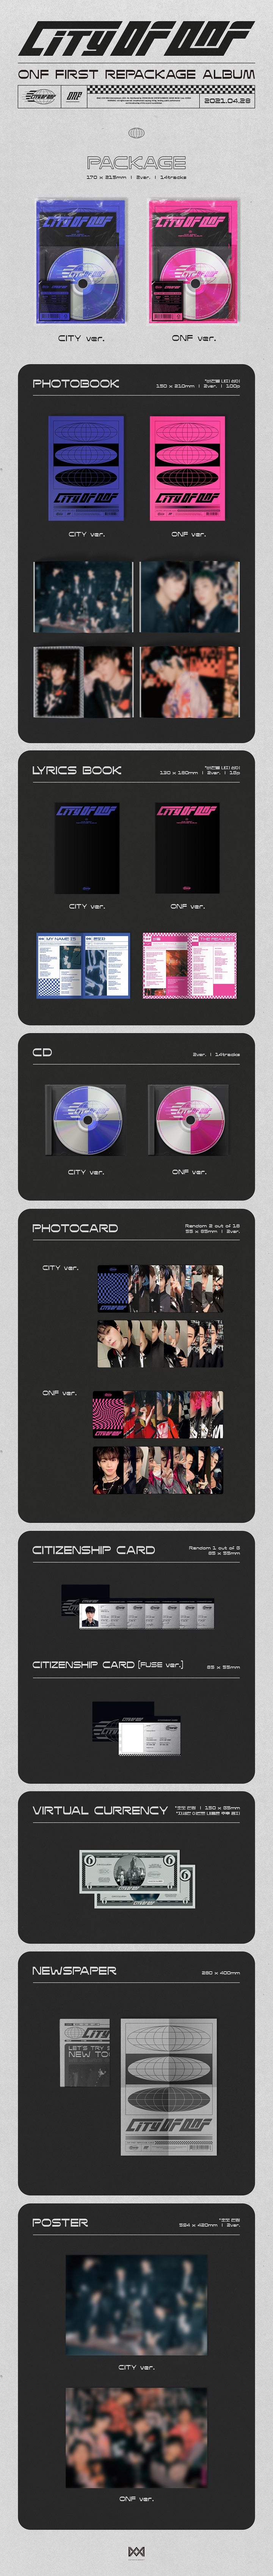 1 CD
1 Photo Book (100 pages)
1 Lyrics Book (16 pages)
2 Photo Cards (random out of 18 types)
1 Citizenship Card (random o...